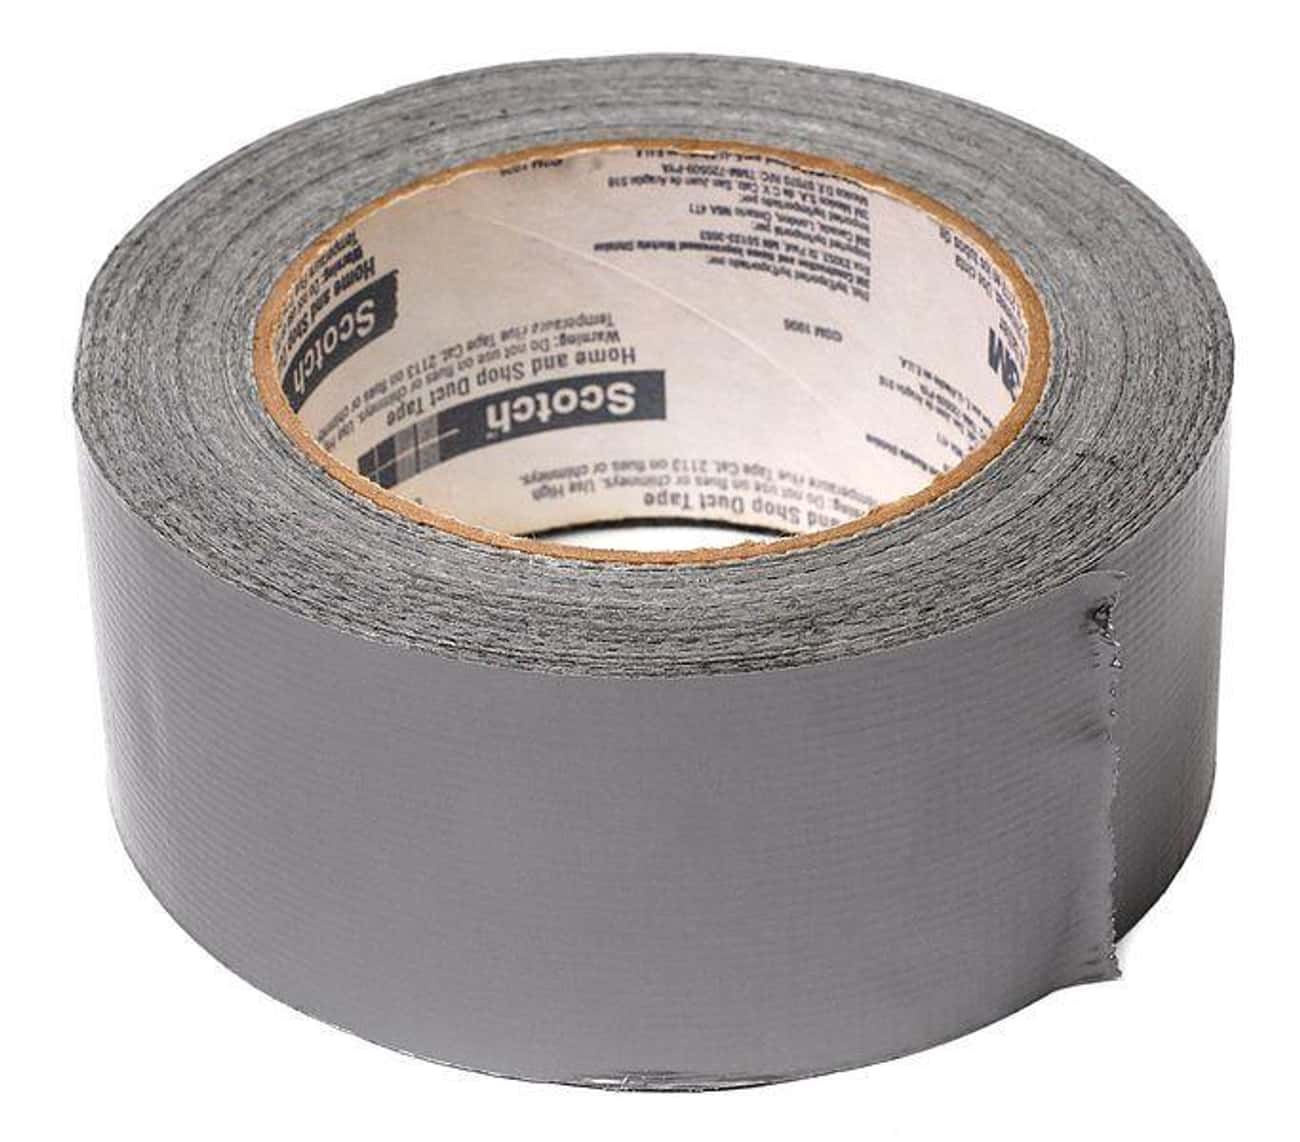 Duct Tape Was The Result Of A Concerned Mother's Letter To The President During World War II